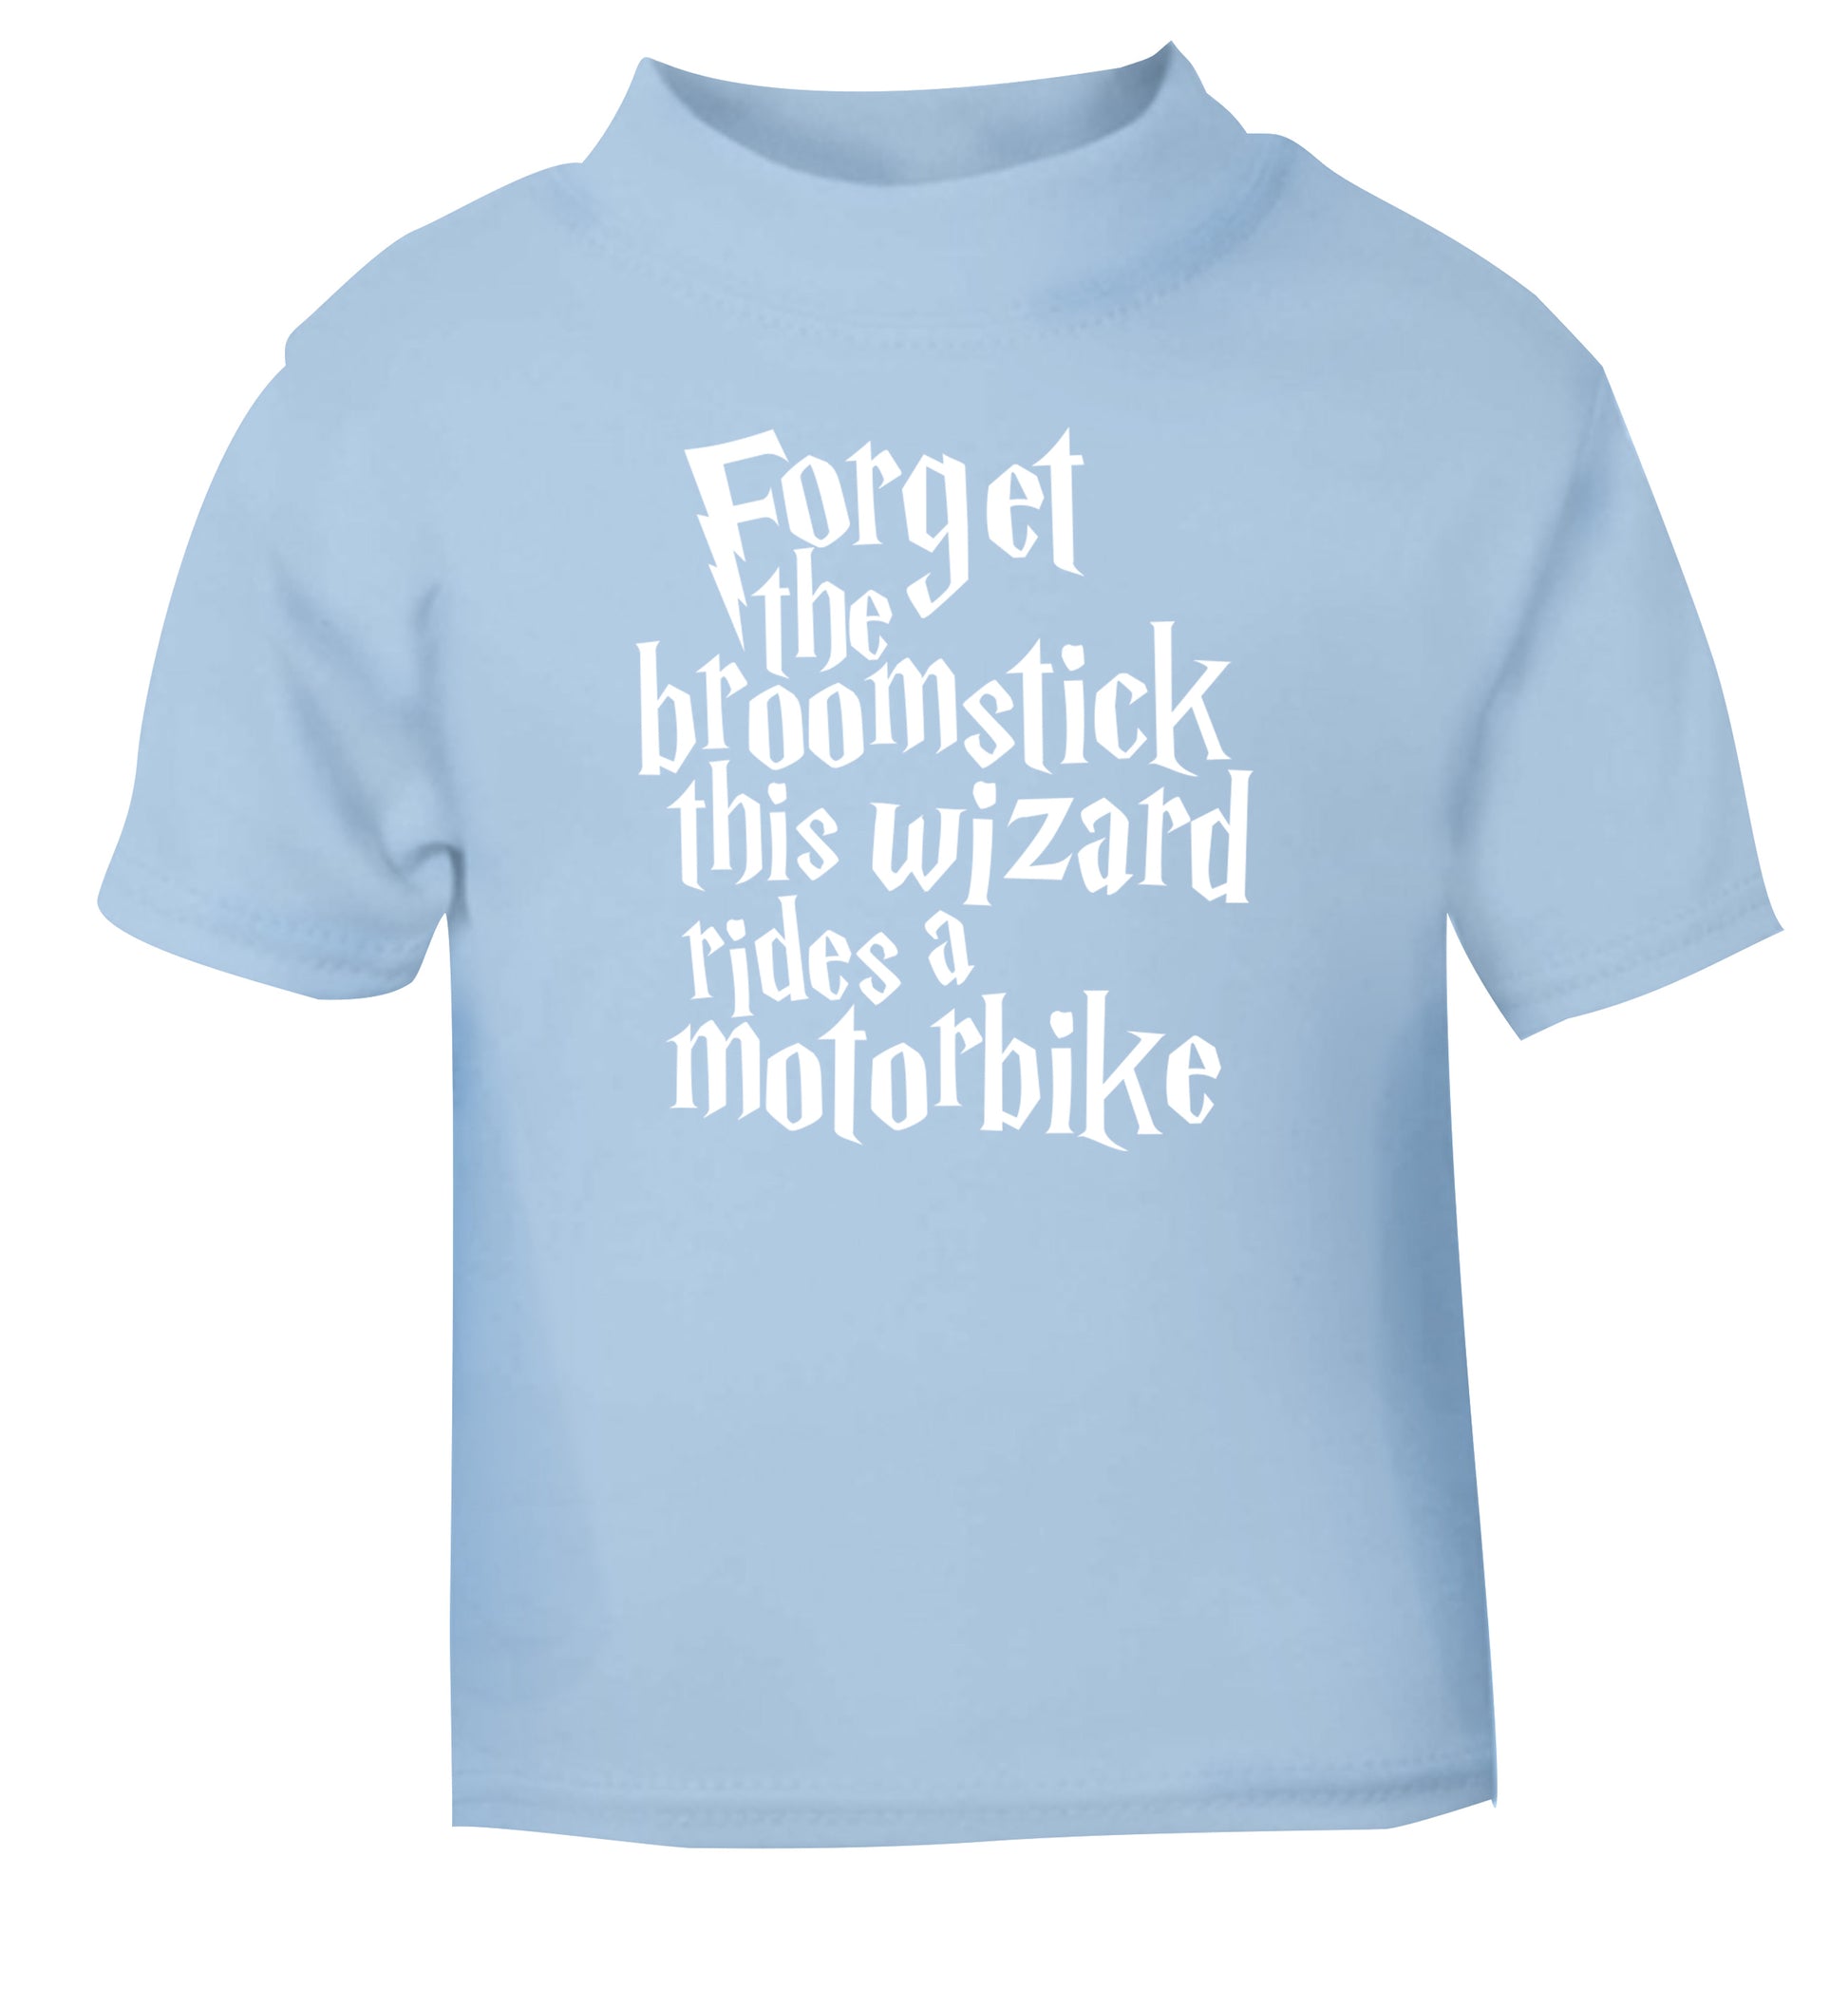 Forget the broomstick this wizard rides a motorbike light blue Baby Toddler Tshirt 2 Years